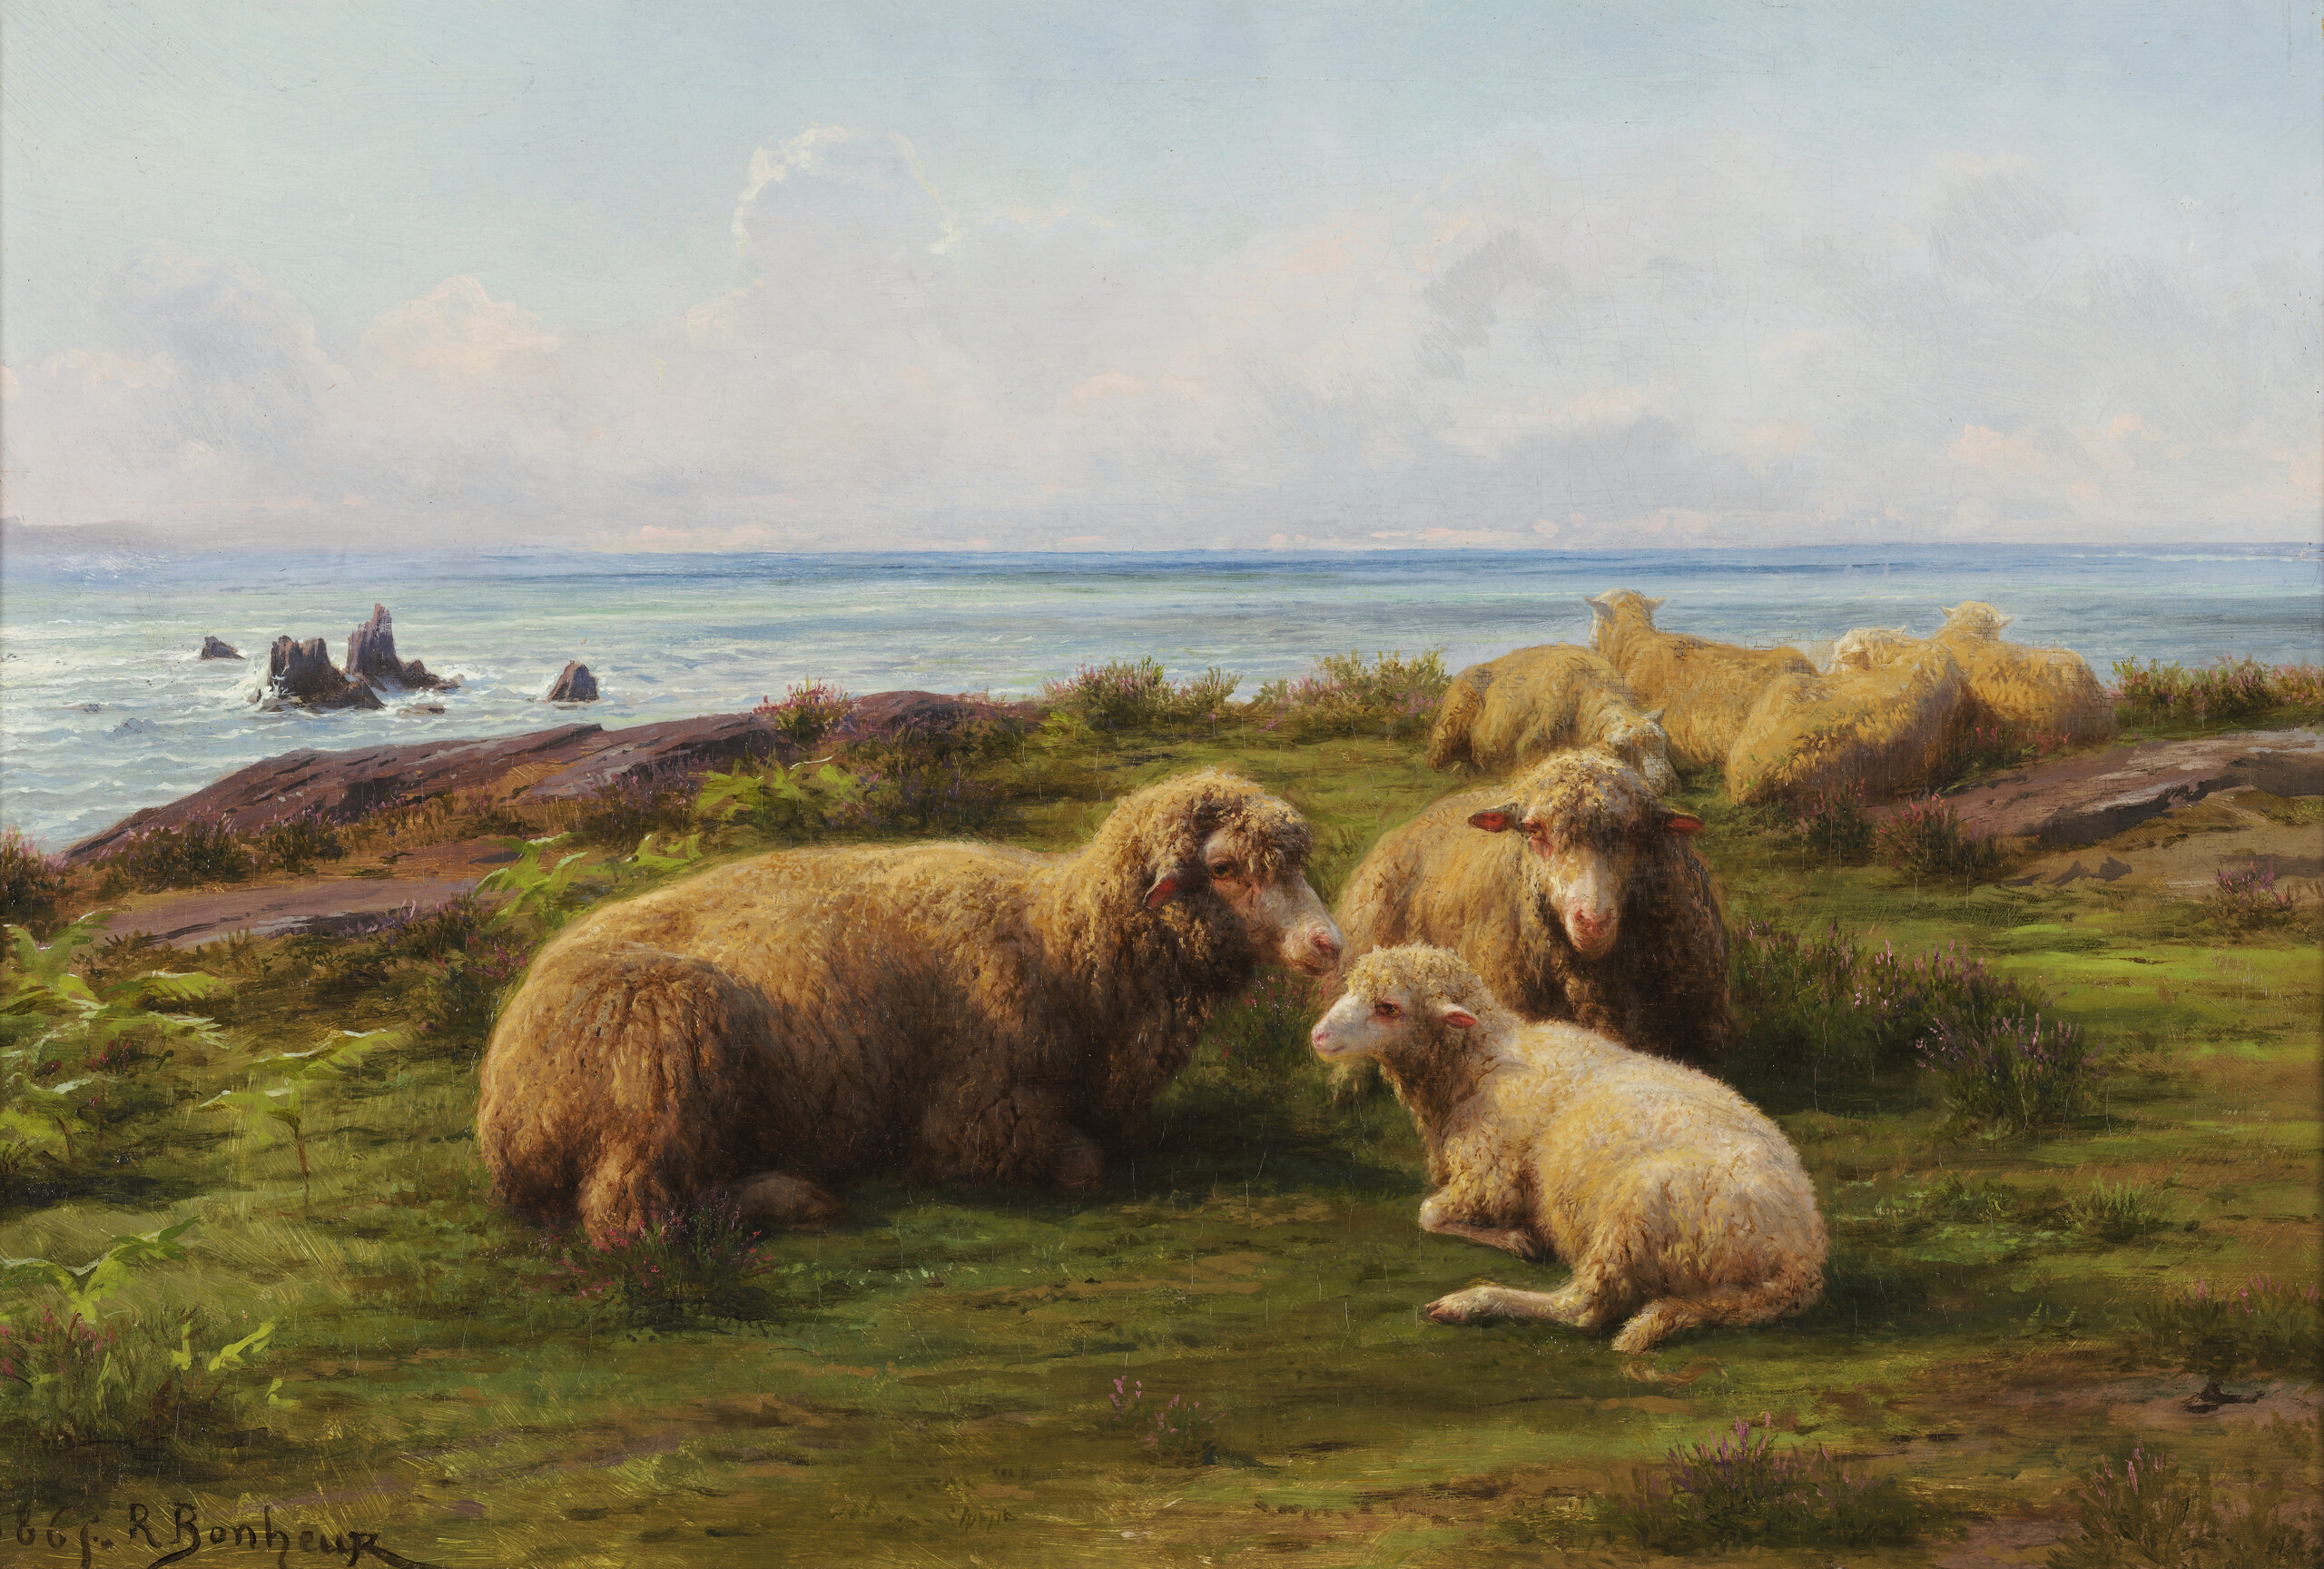 A flock of sheep rest on a grassy hill by a rocky shoreline in a landscape painting. In the center, two adults and a lamb lie in a group. The sky contains distant rolling clouds over the sea, which stretches to the horizon. A breeze is suggested by the waves crashing on rocks, and sunshine is shown through golden light and shadows around the sheep.